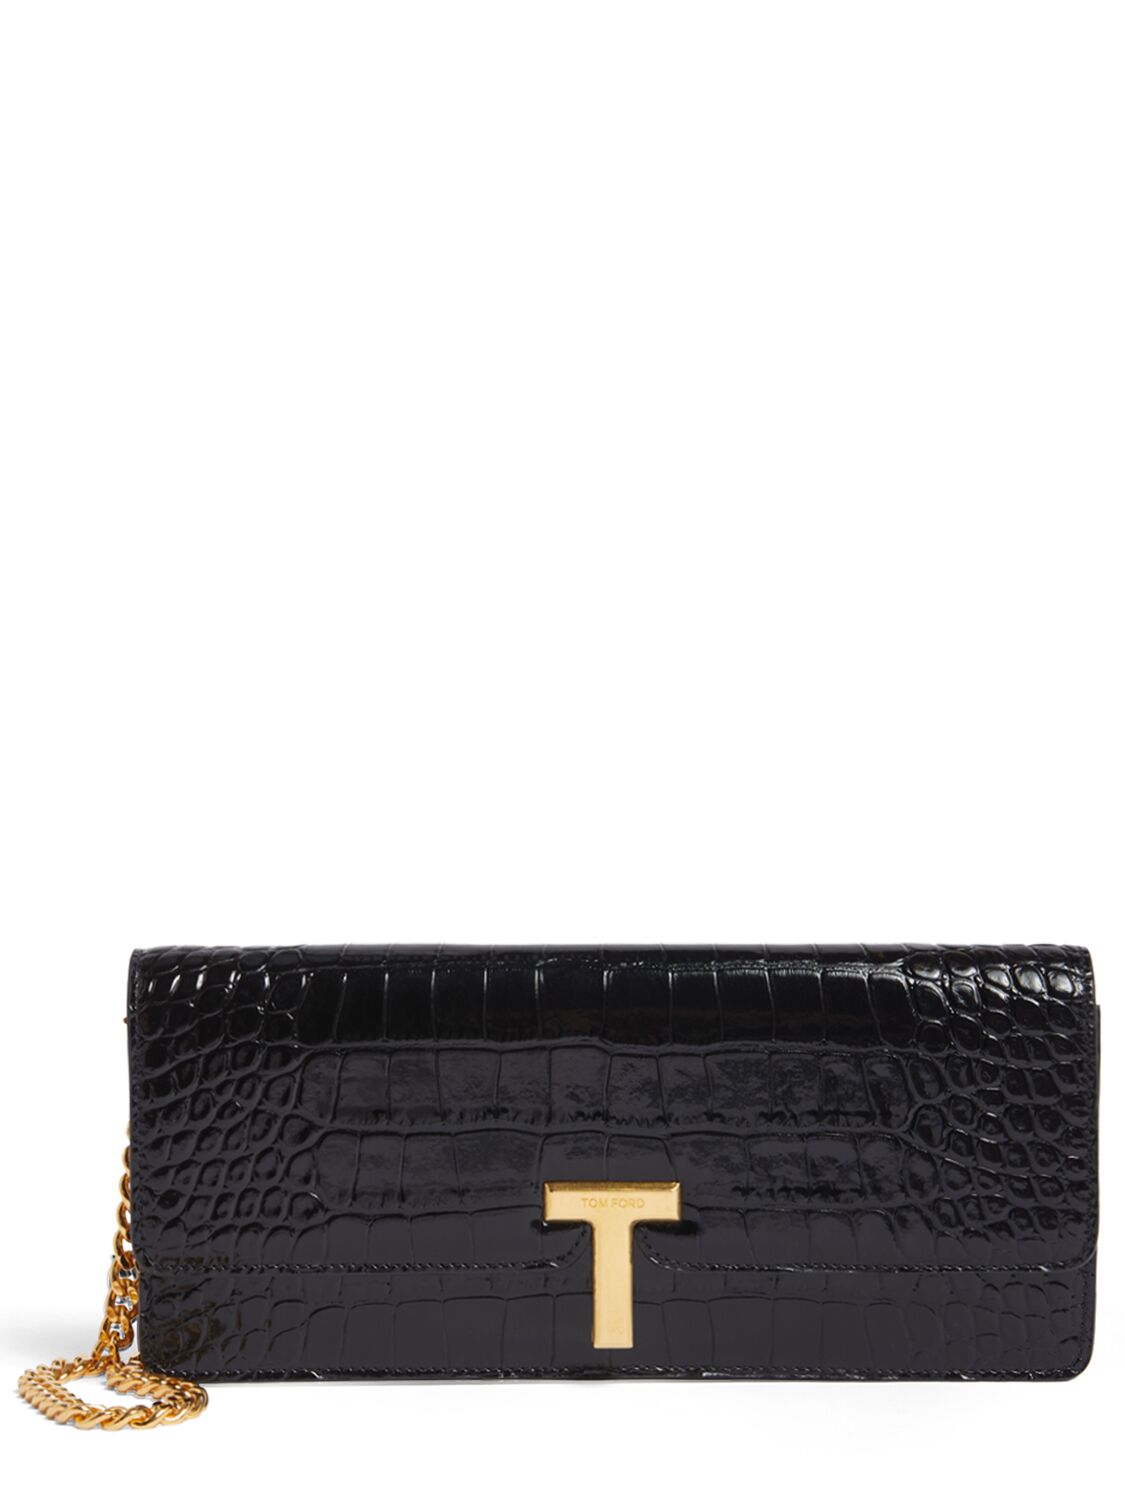 Tom Ford Shiny Embossed Leather Clutch In Black